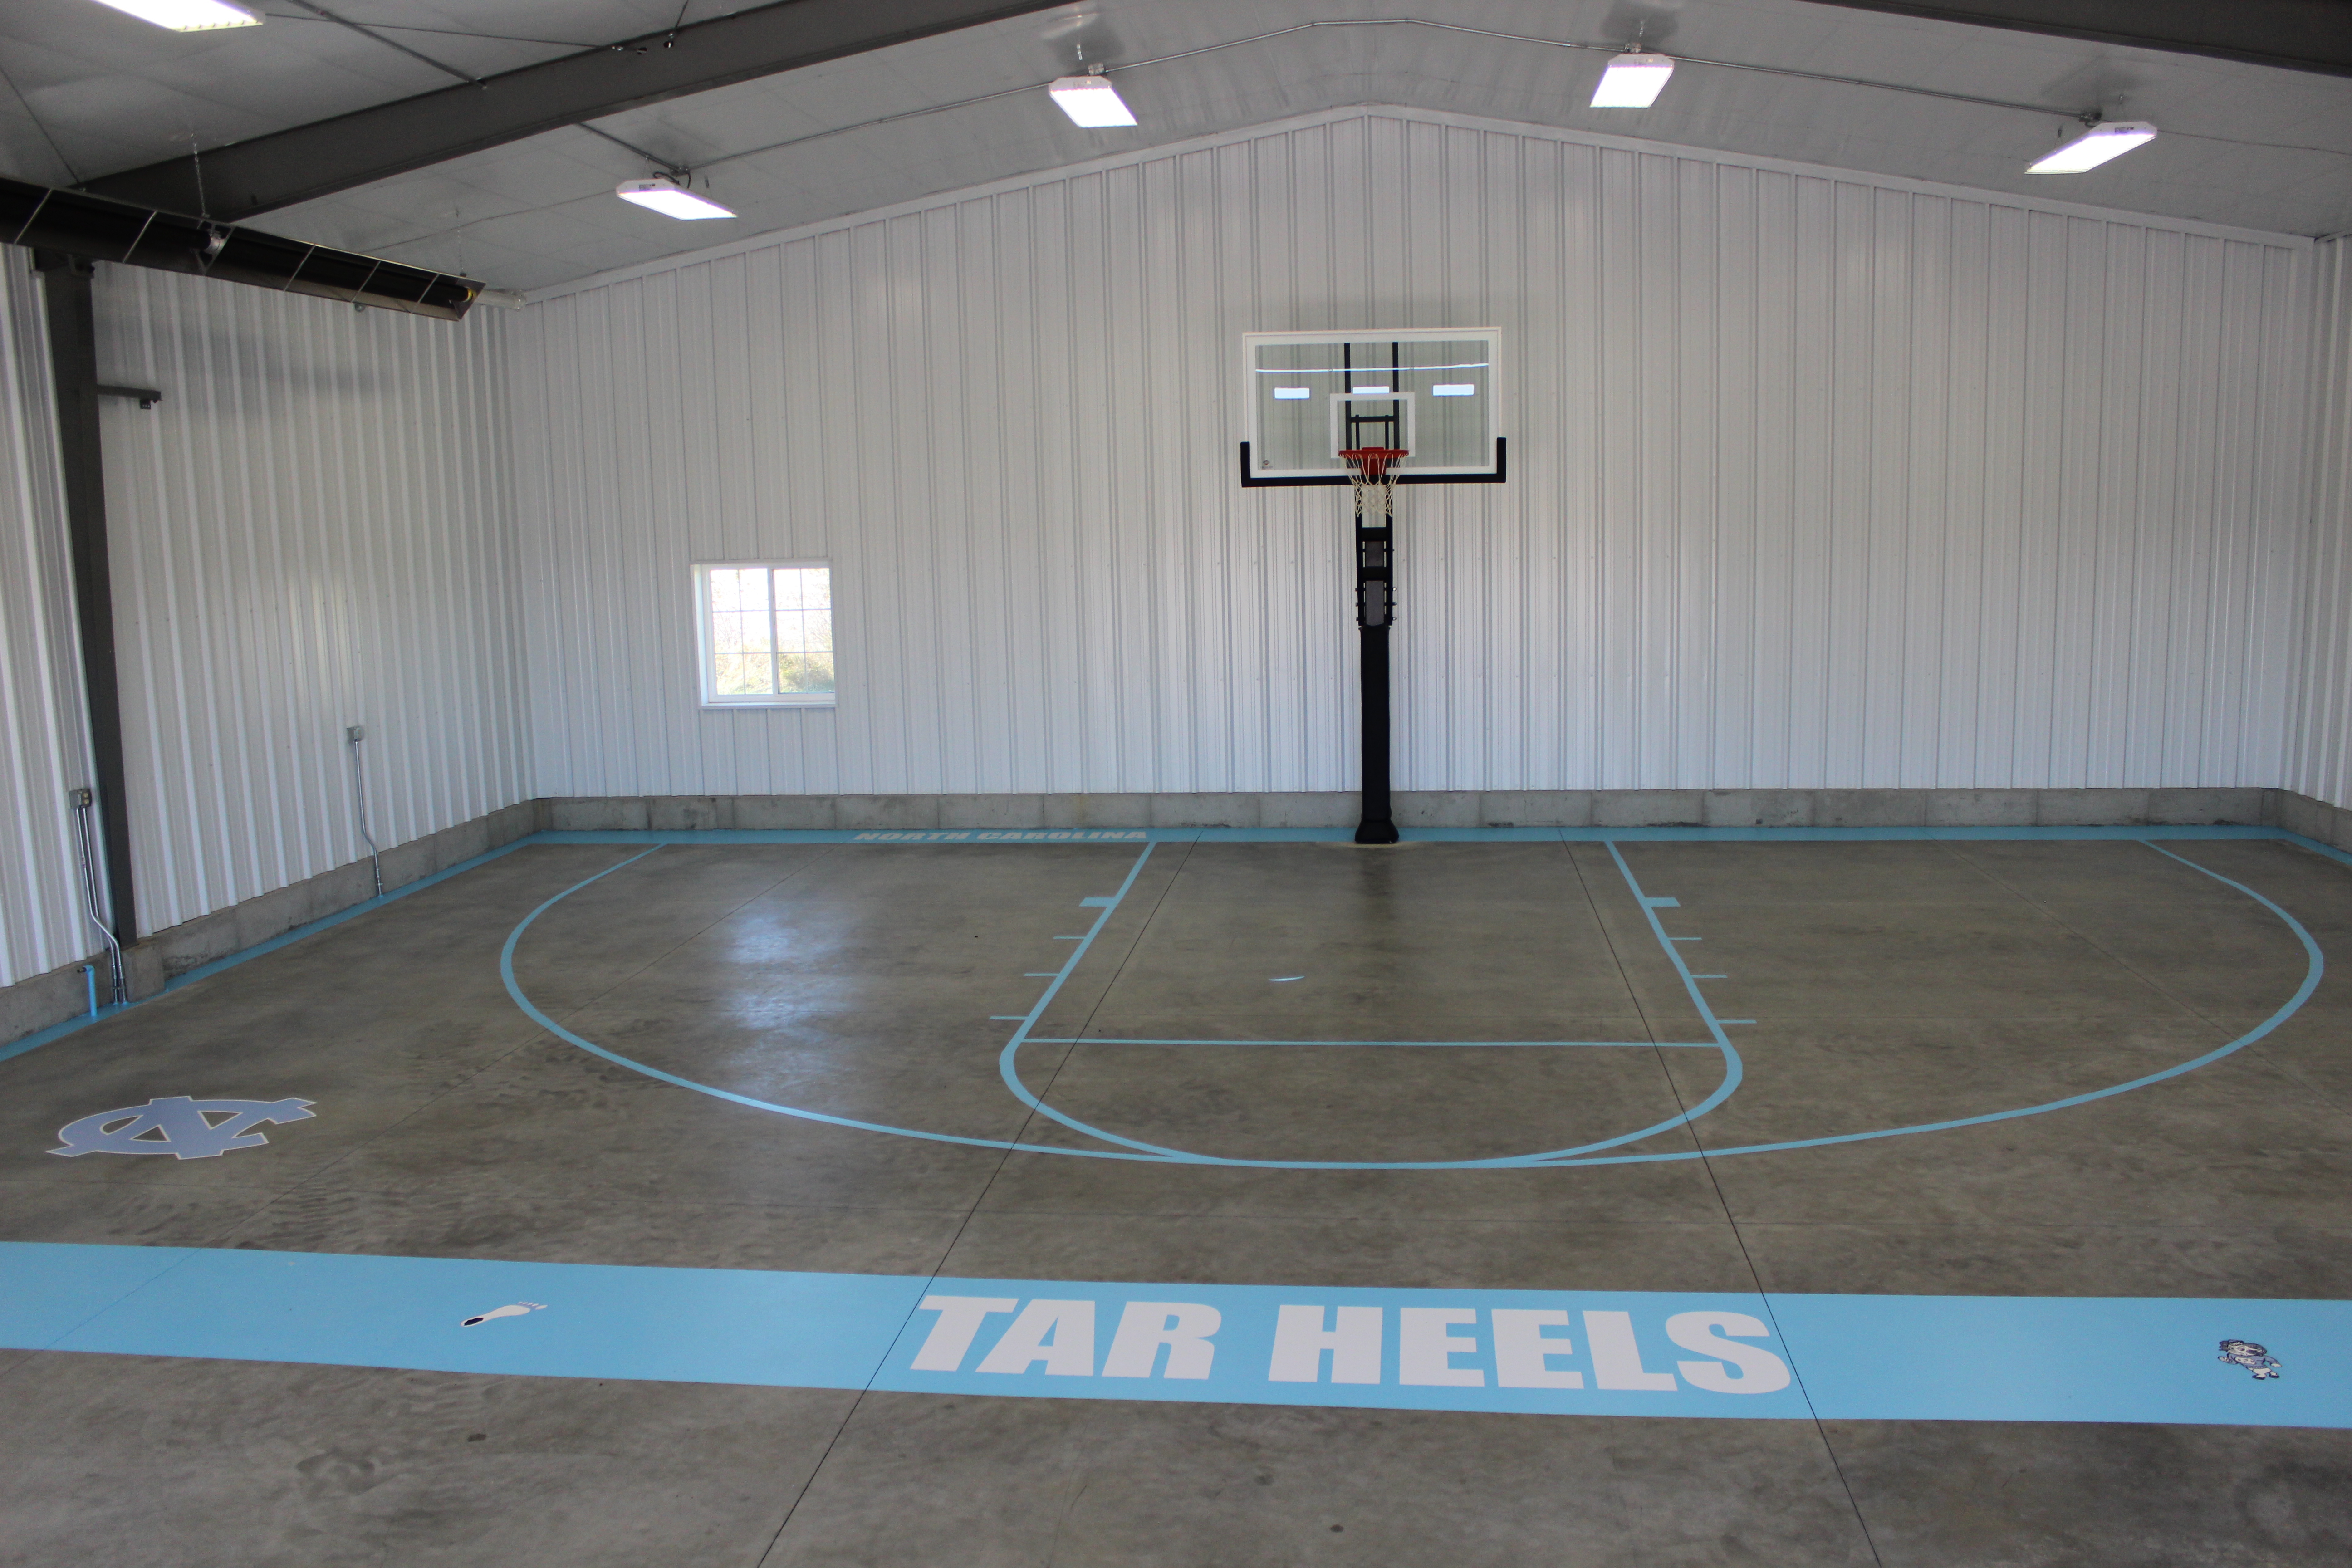 This Pro Dunk Platinum basketball system sits in an indoor gym, on concrete floor.